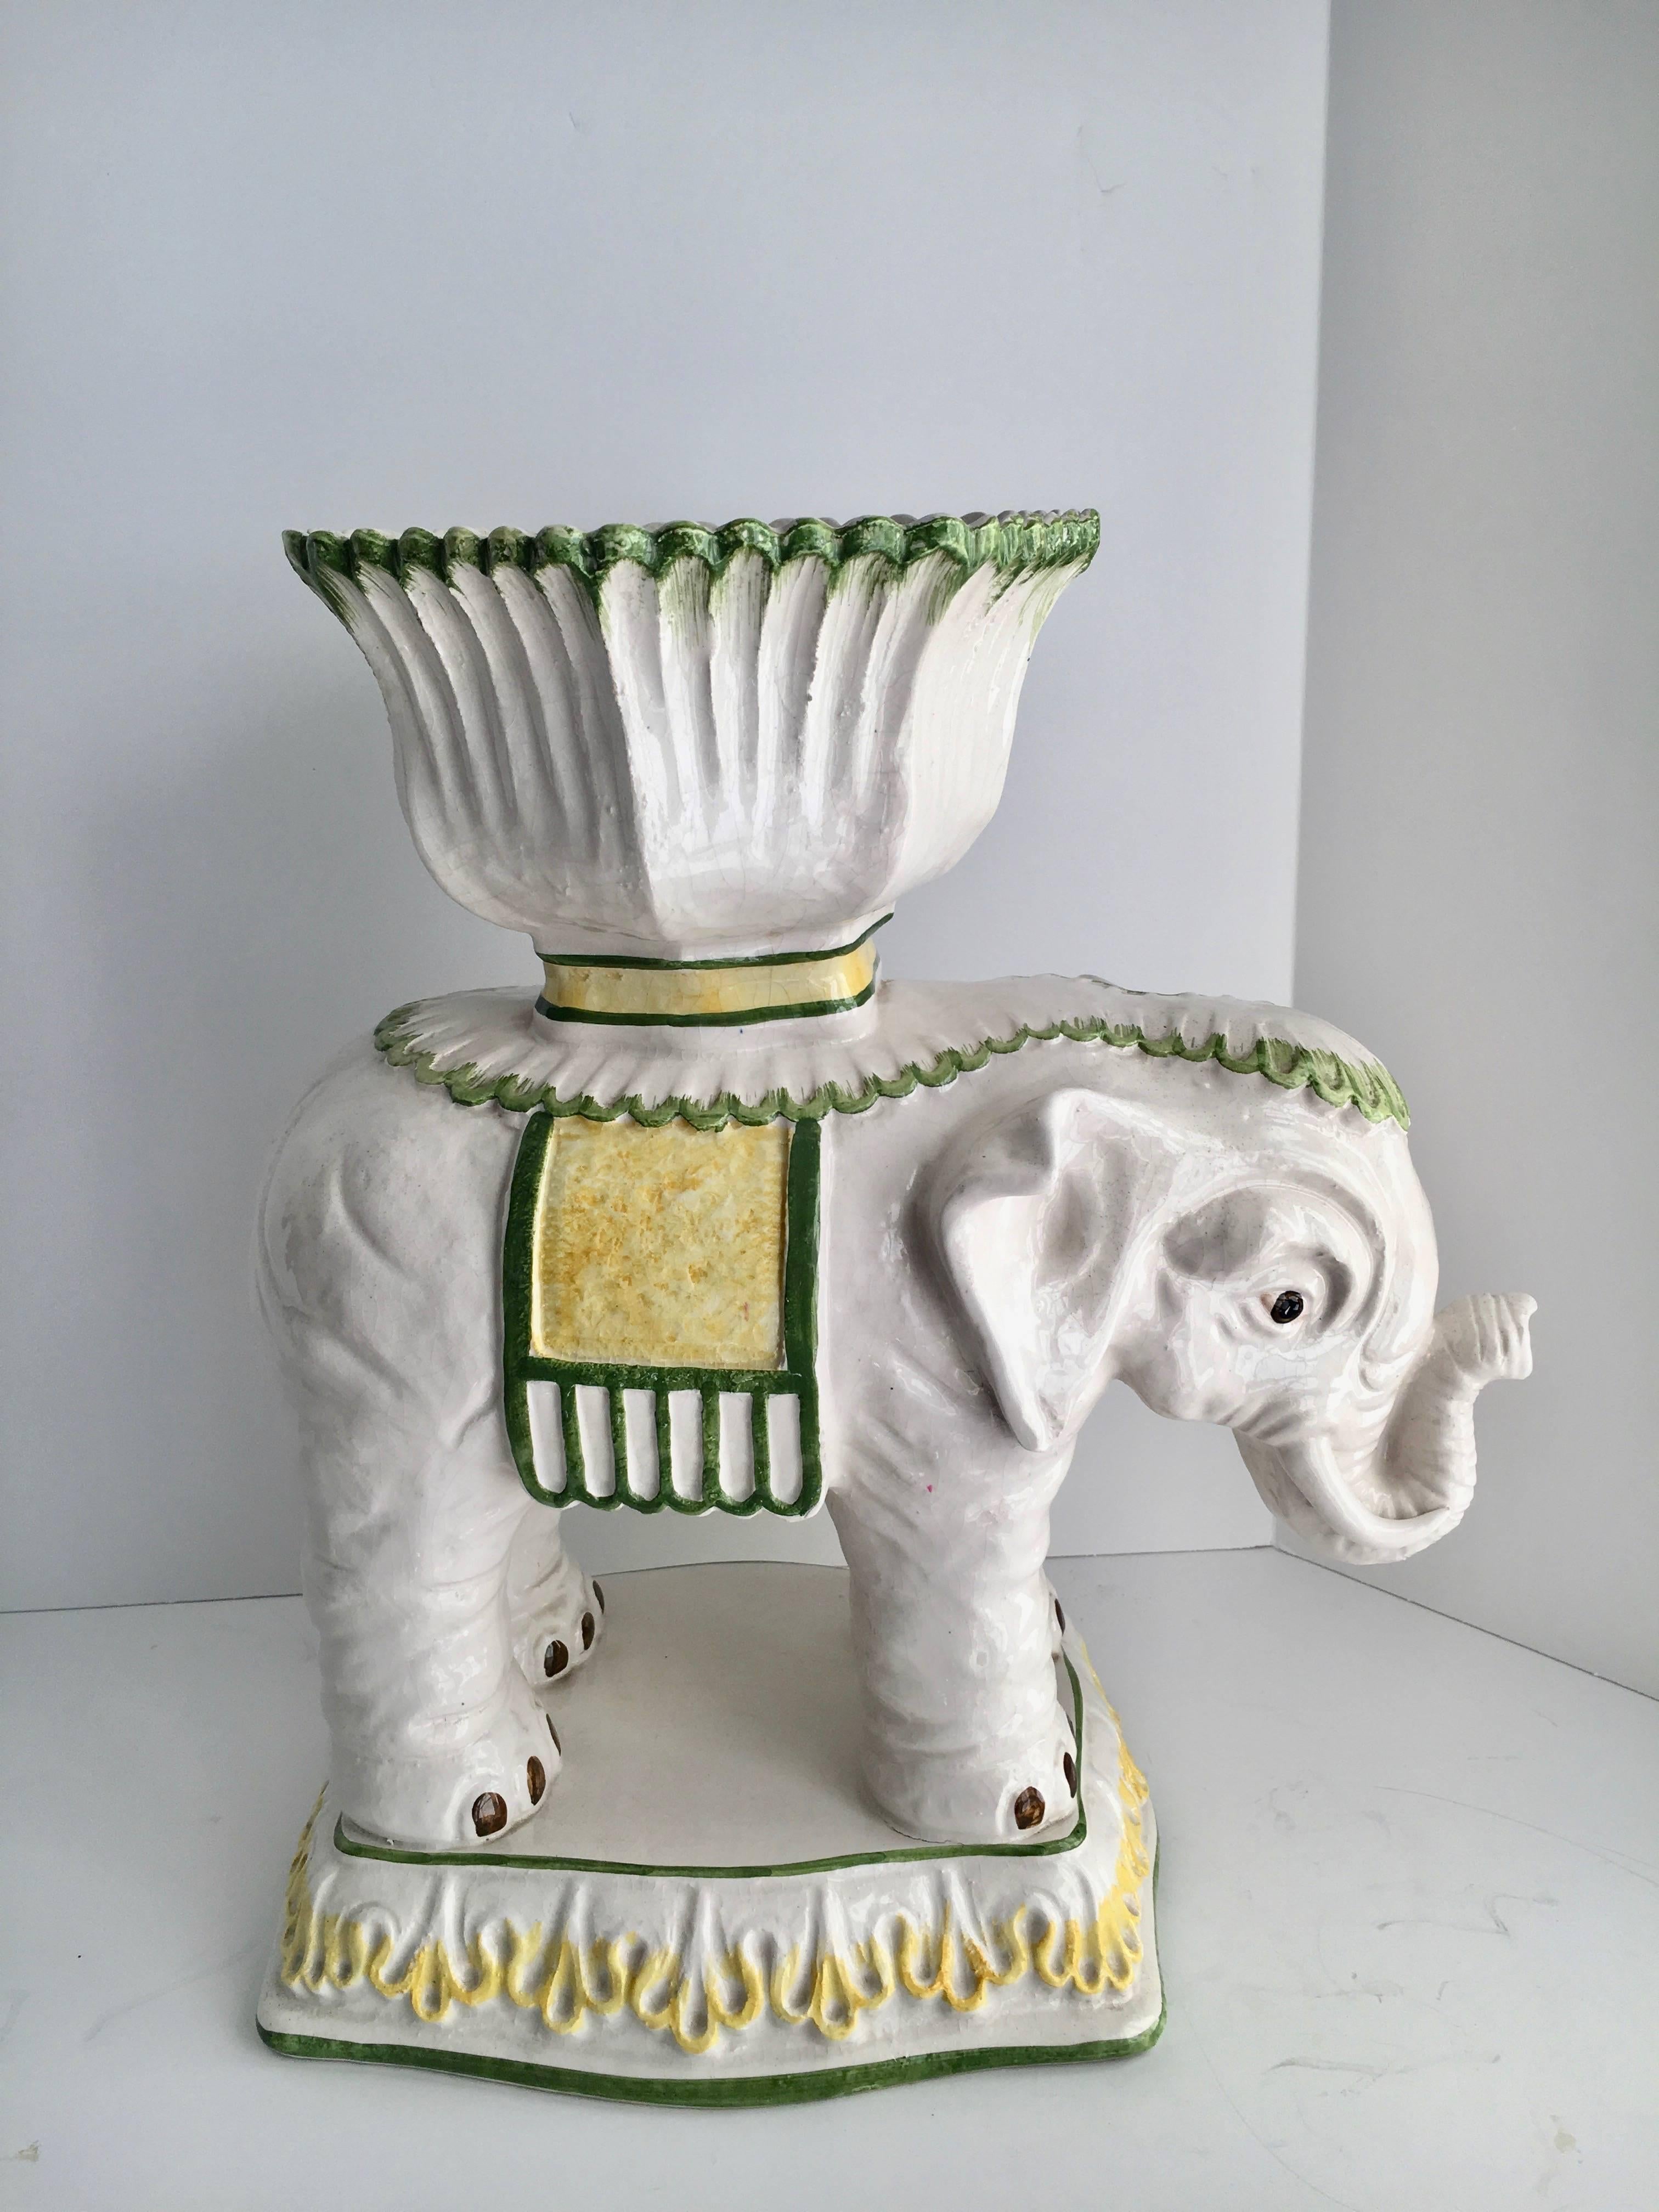 Italian ceramic elephant cachepot planter. This is a great compliment to the garden or interior as the elephant has a very large top container (8